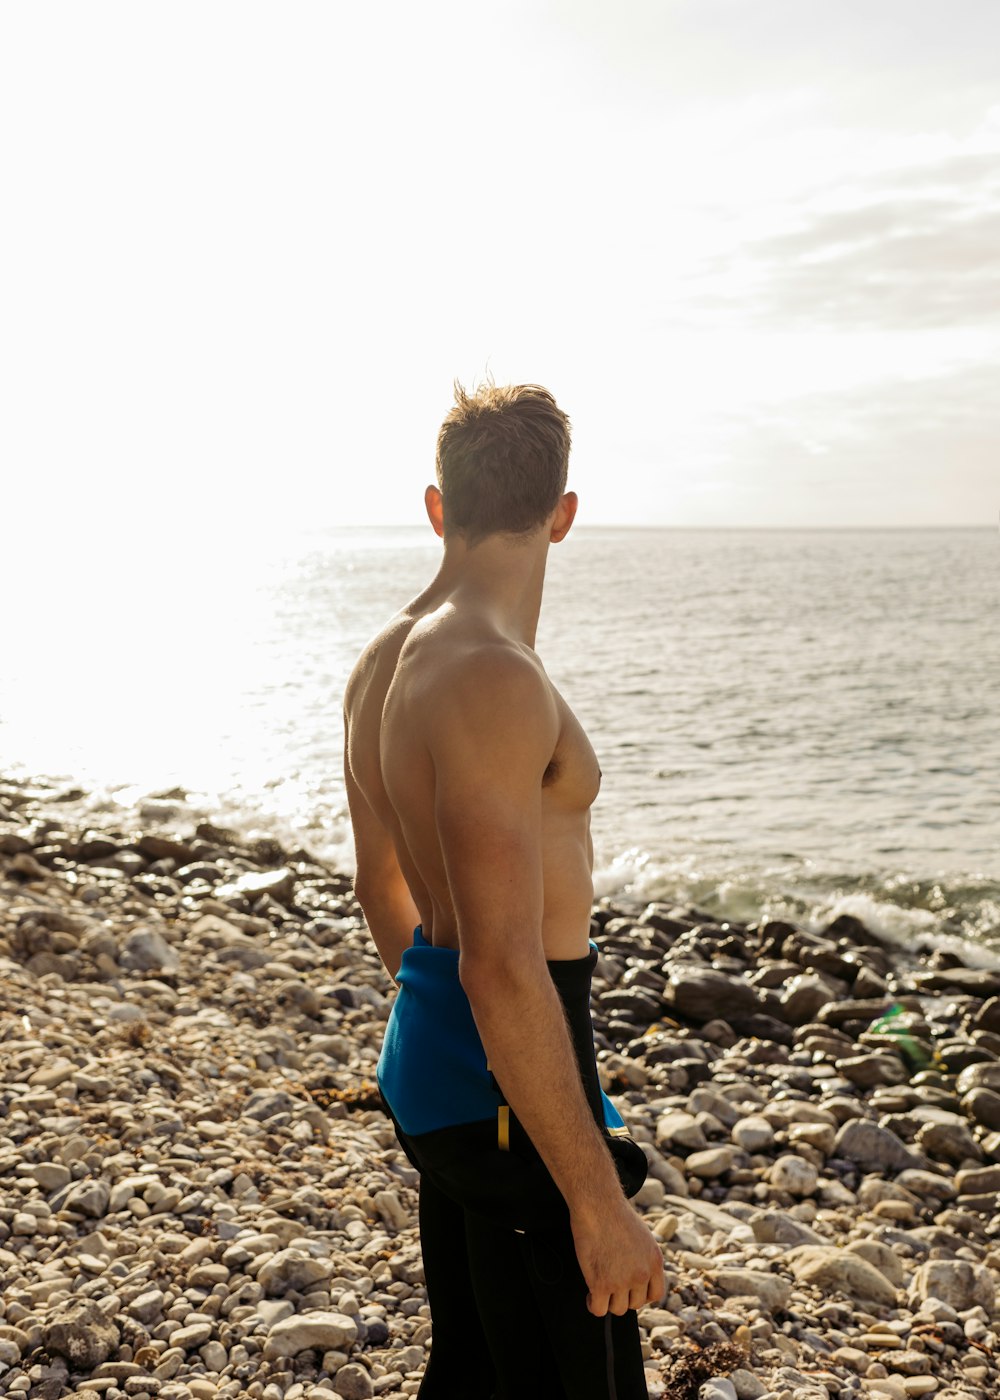 man in blue and black bottoms standing on beach